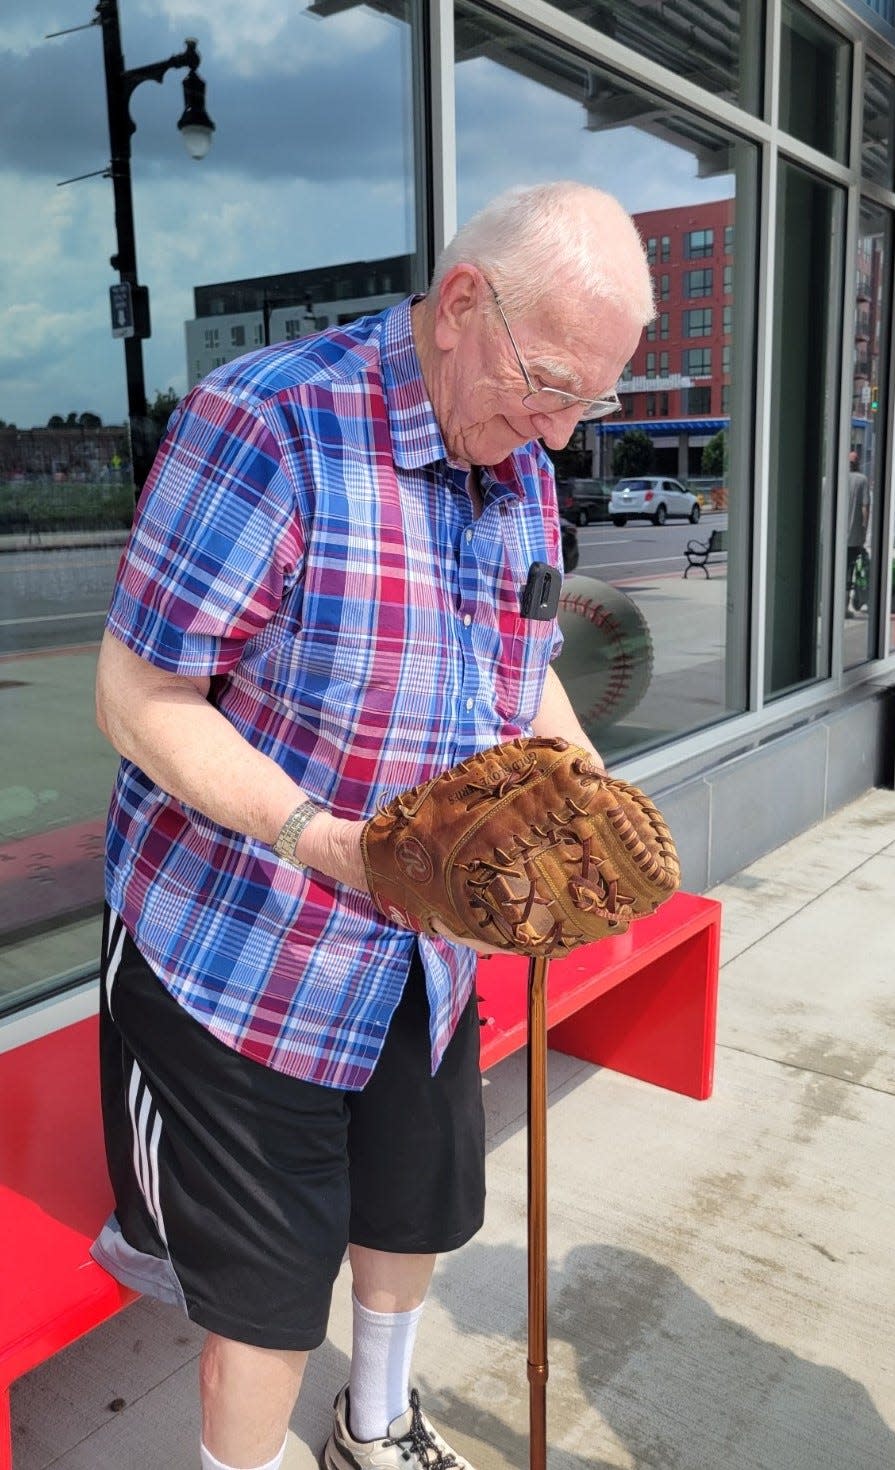 Donald Holcomb was all smiles after he was reunited with his baseball glove outside of Polar Park on July 18.